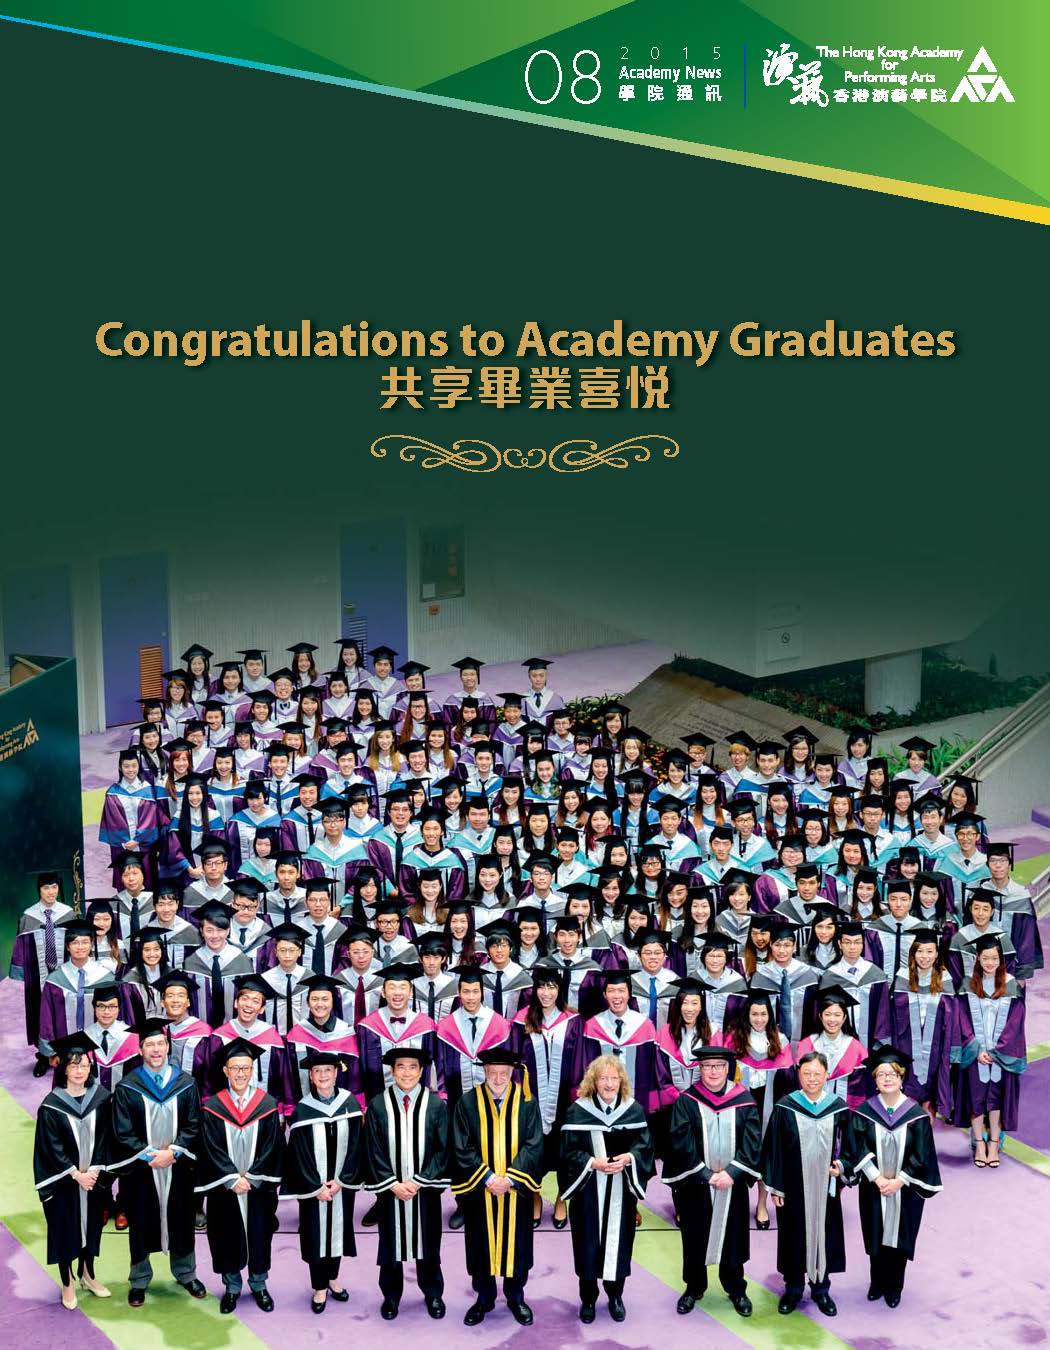 Academy News August 2015 issue